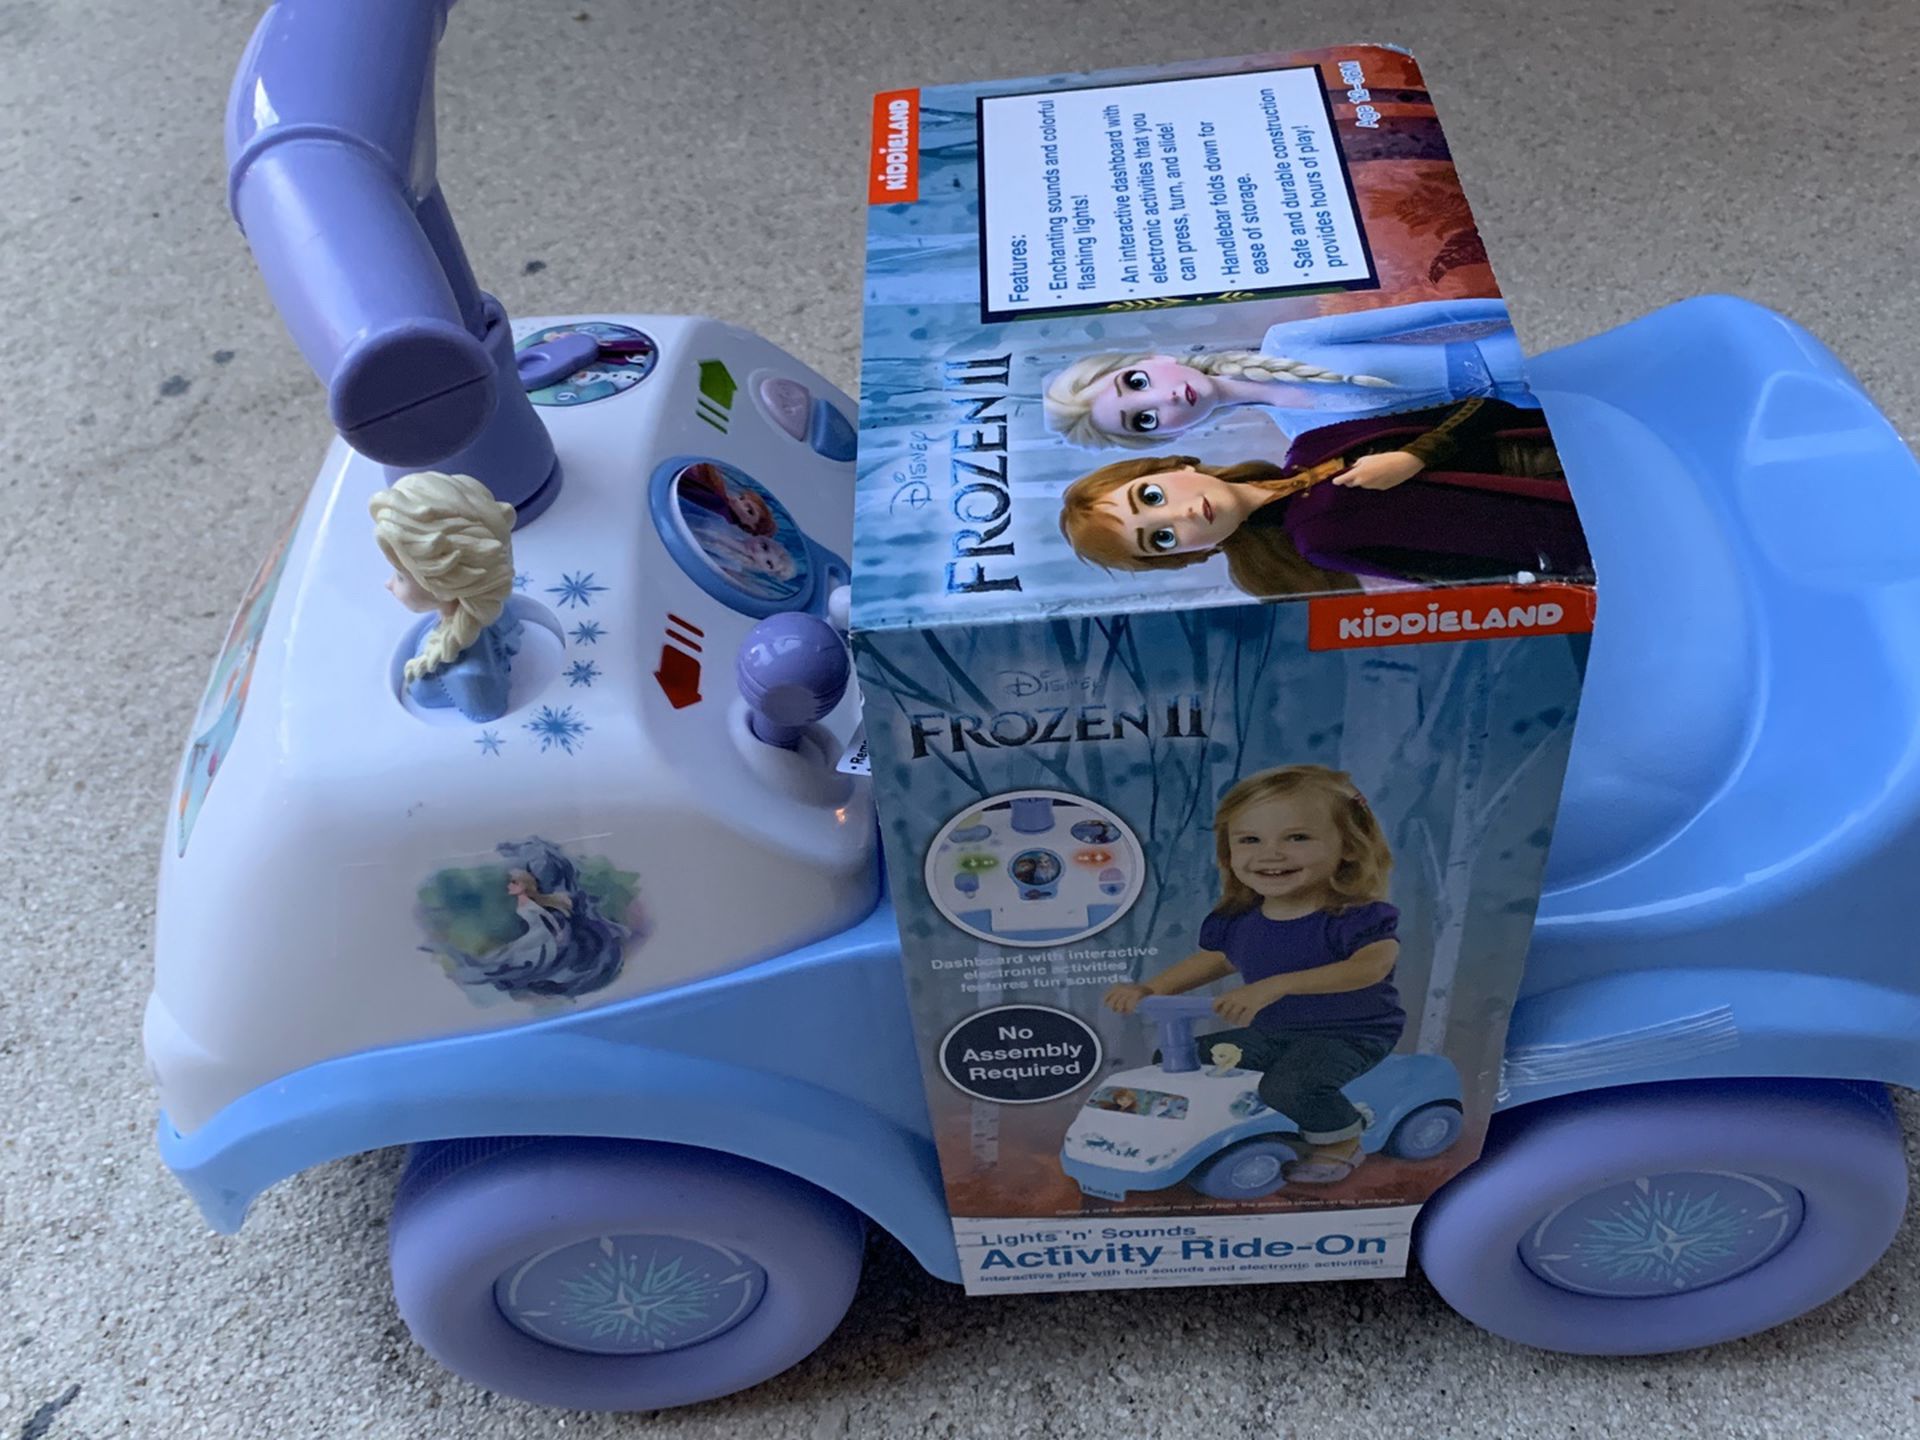 Frozen Lights And Sounds Actuvity Ride On Toy - Brand New - Fun Push Car Kids Toy - Retails For Over $30